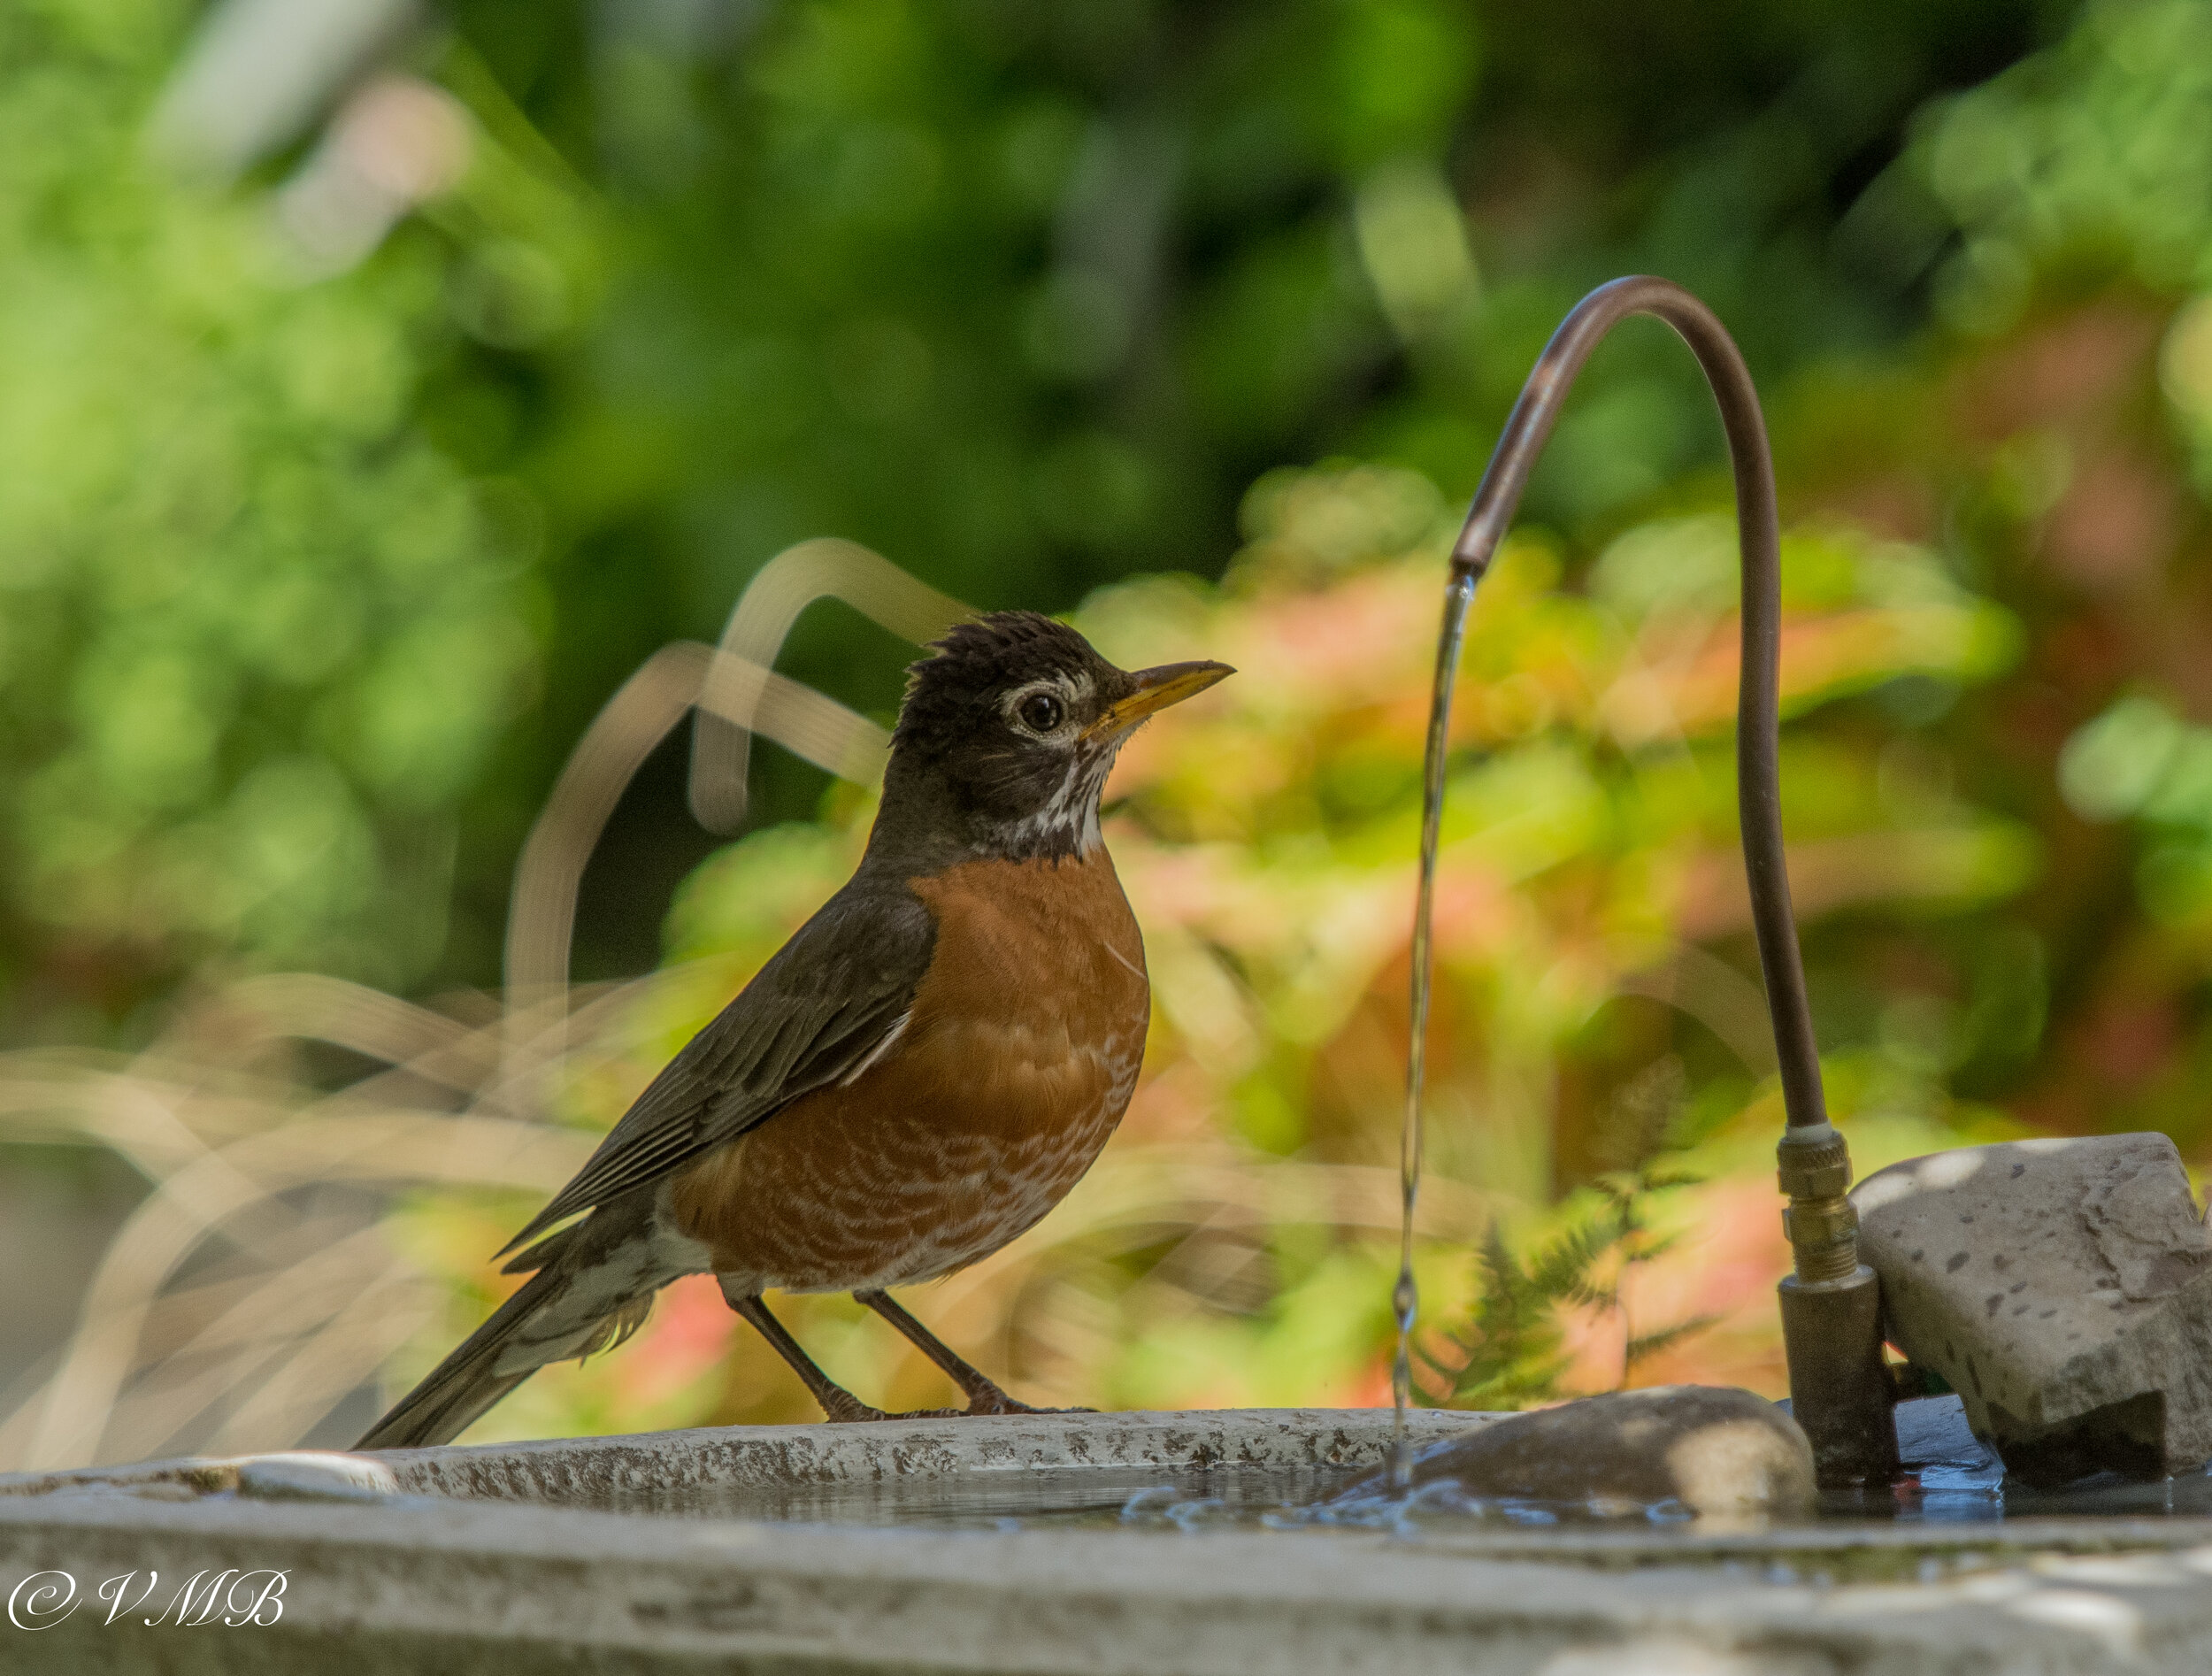 A robin takes a drink from the bird bath with the solar-powered fountain.